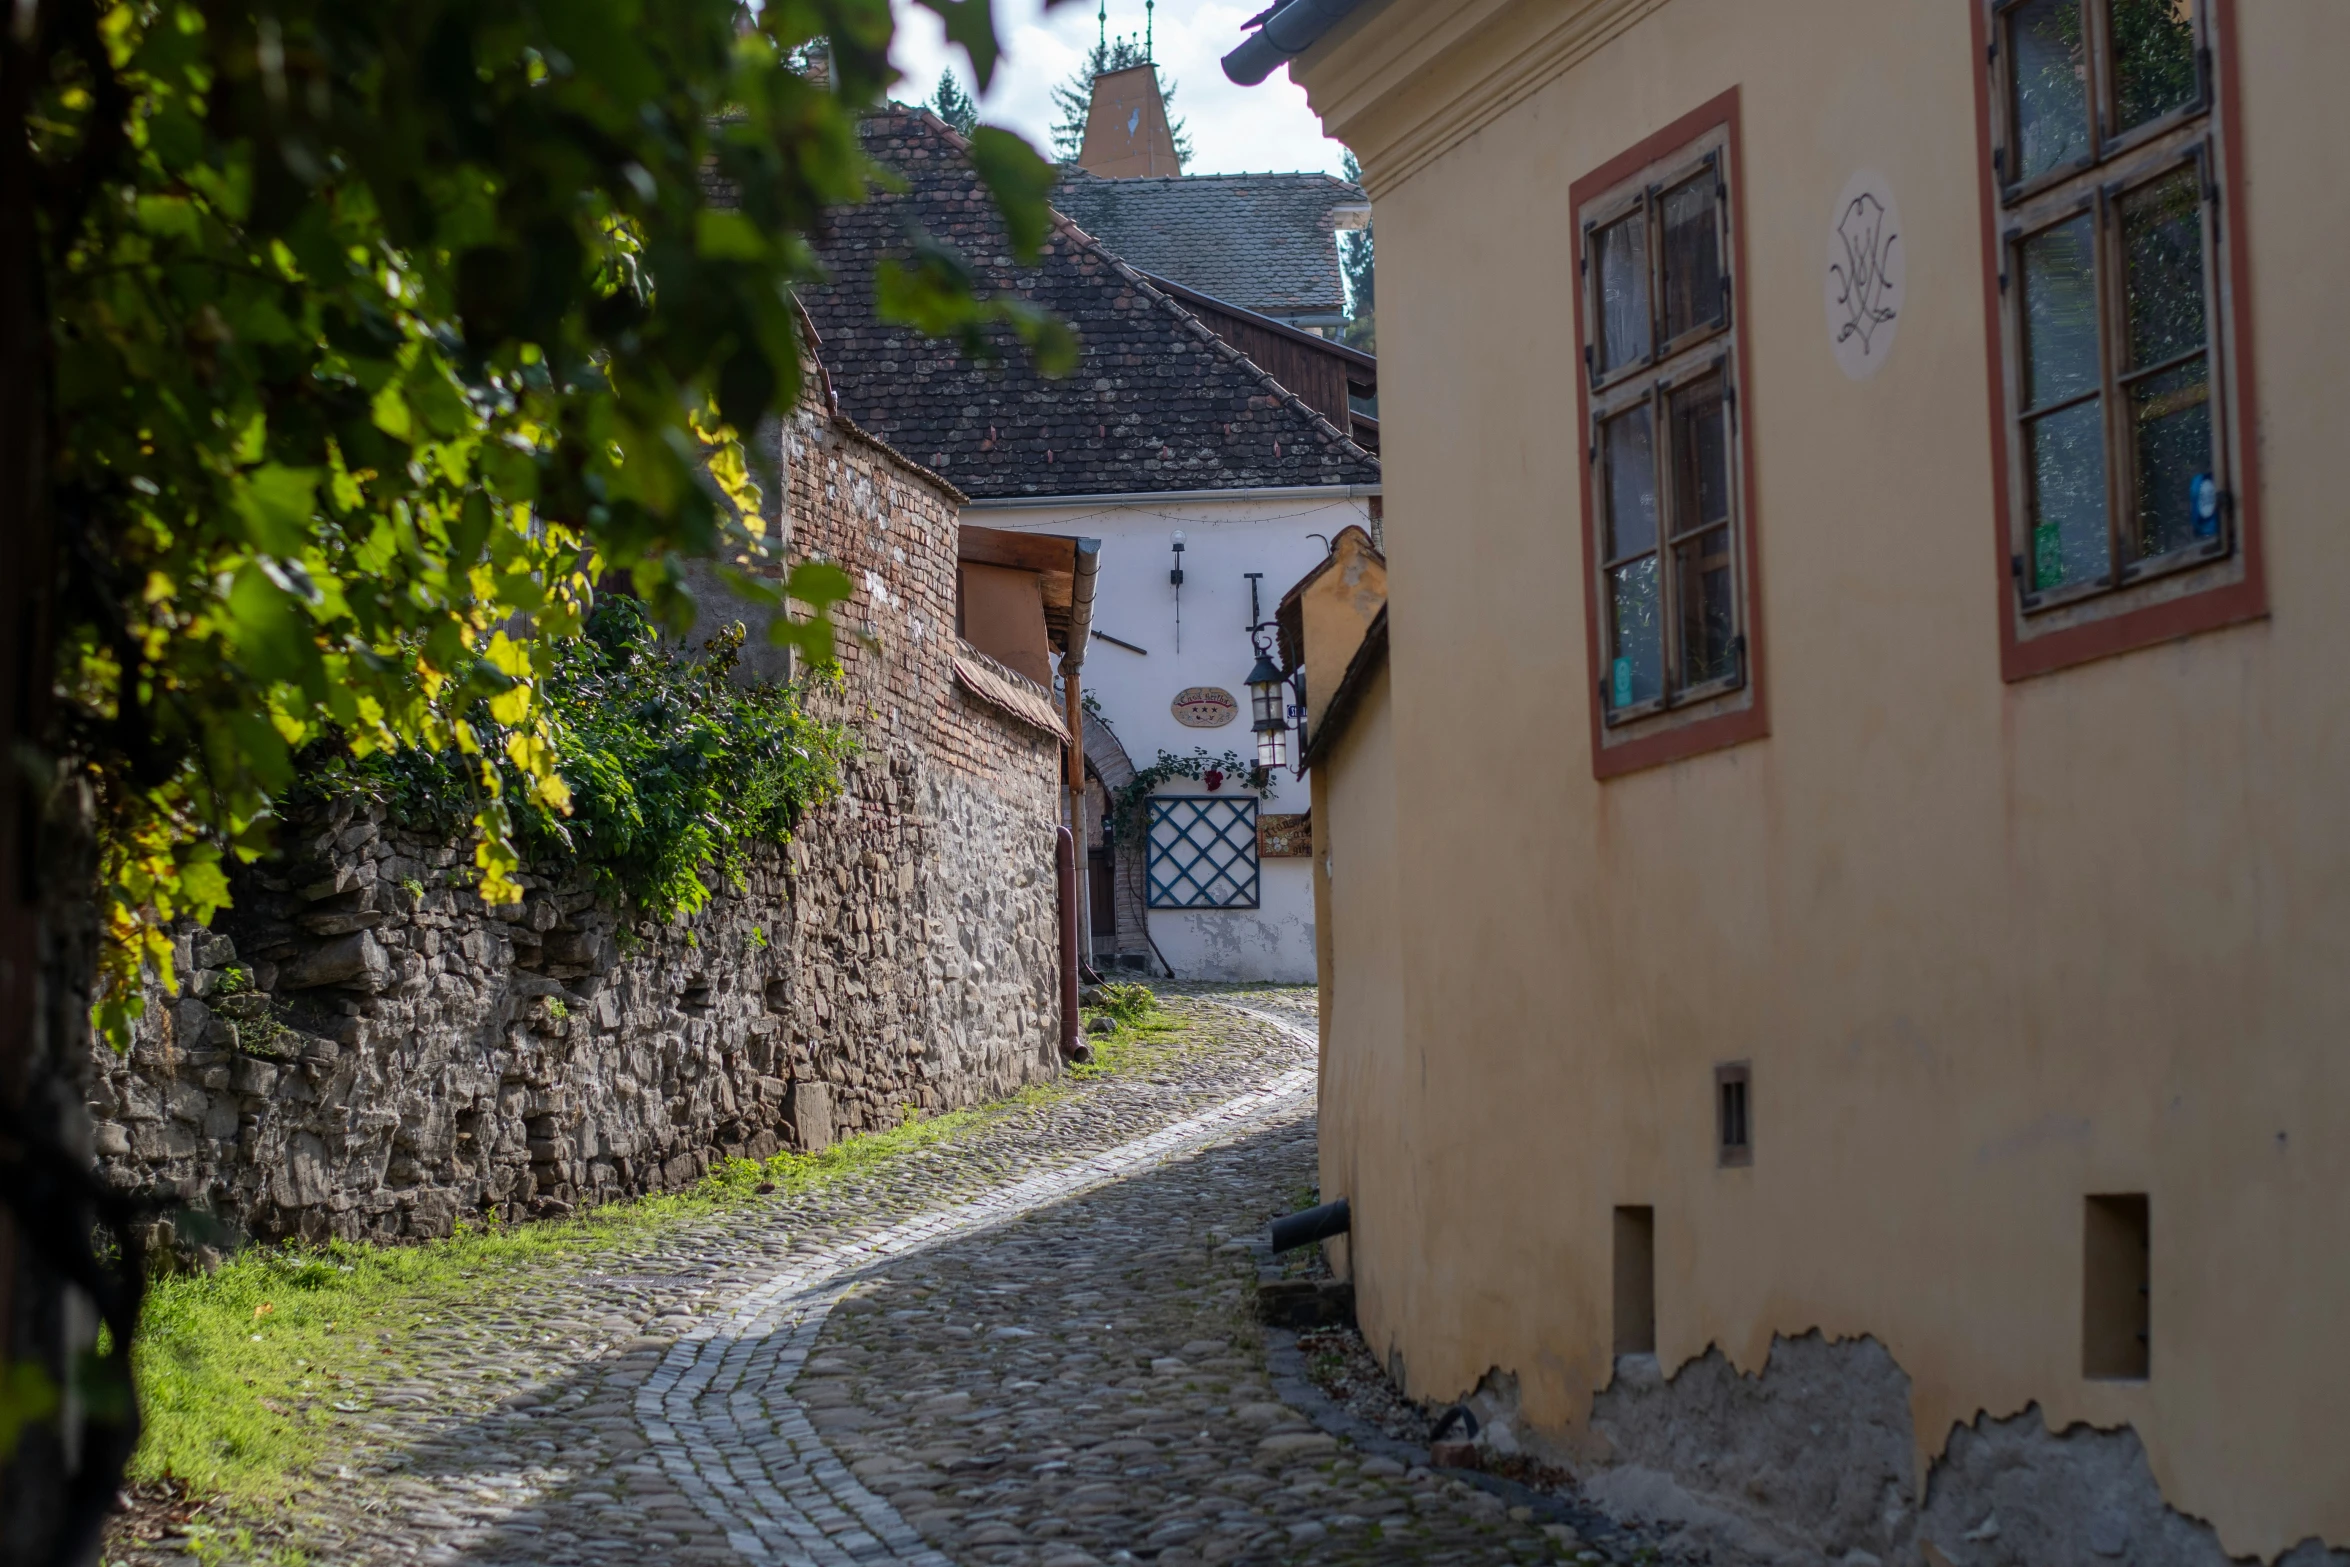 a narrow street with some windows and a cobblestone sidewalk